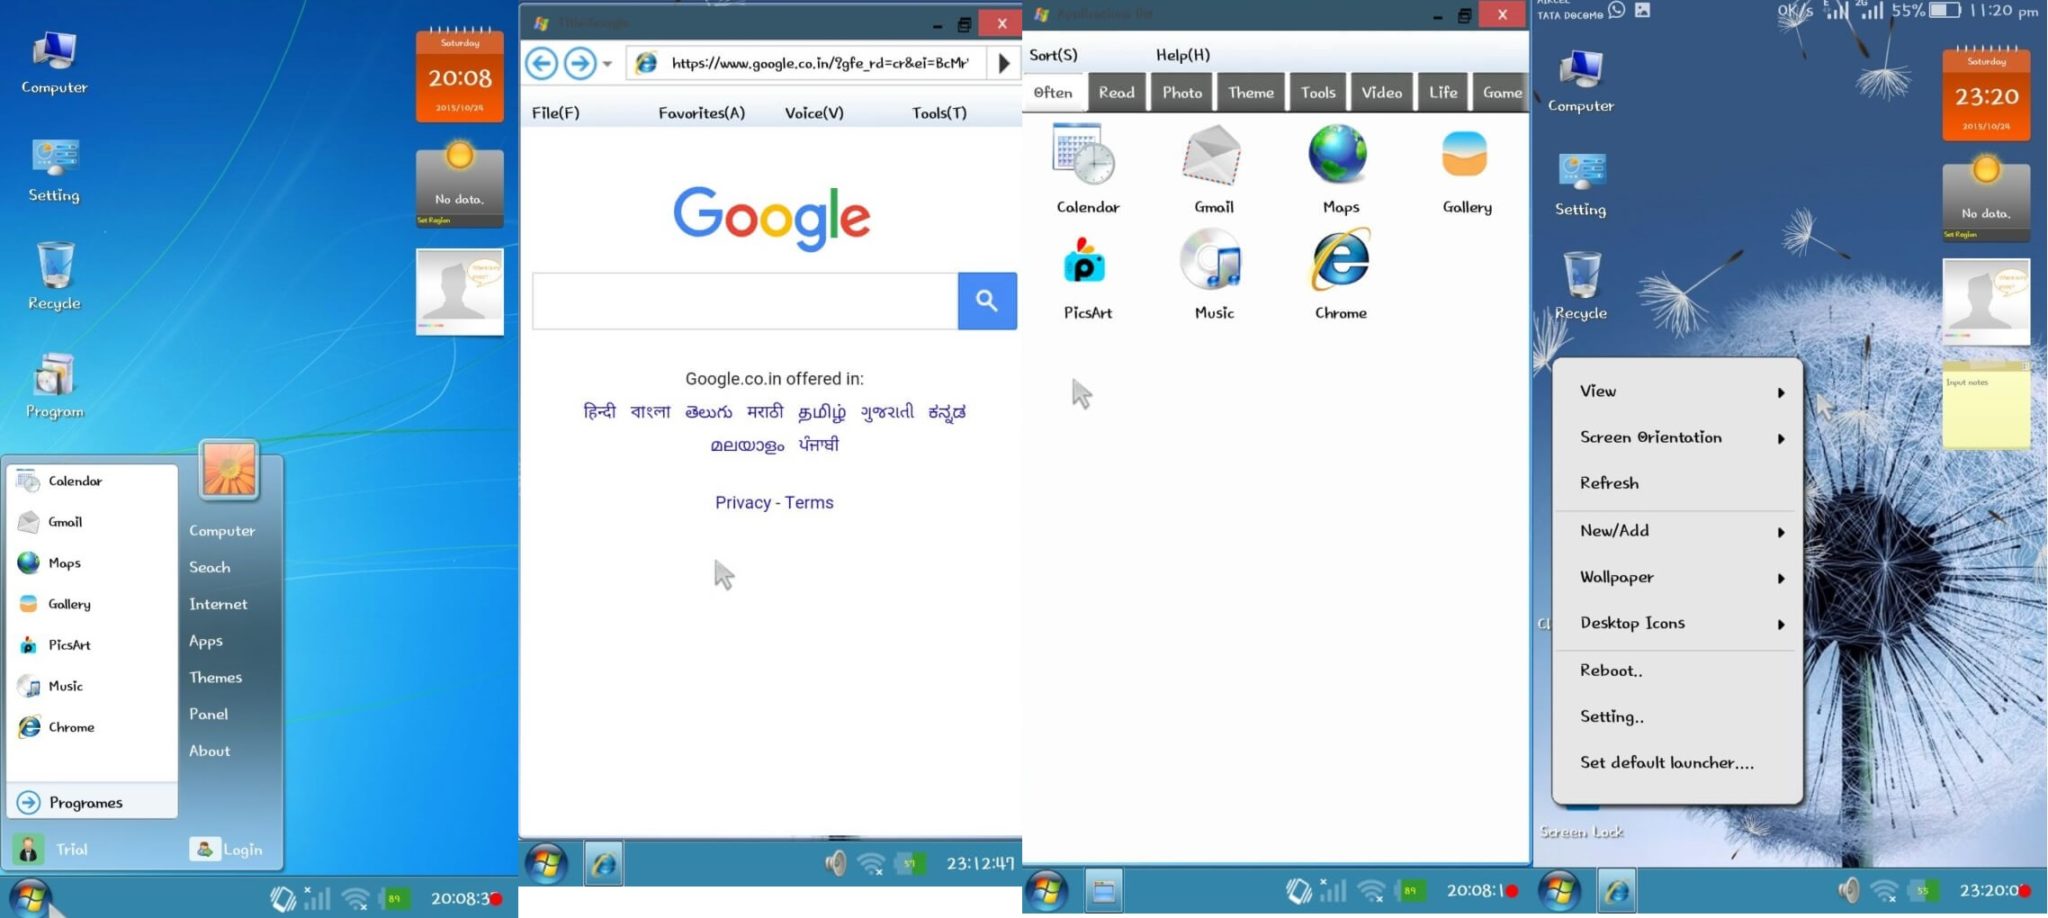 Windows 7 launcher for Android apk Free Download